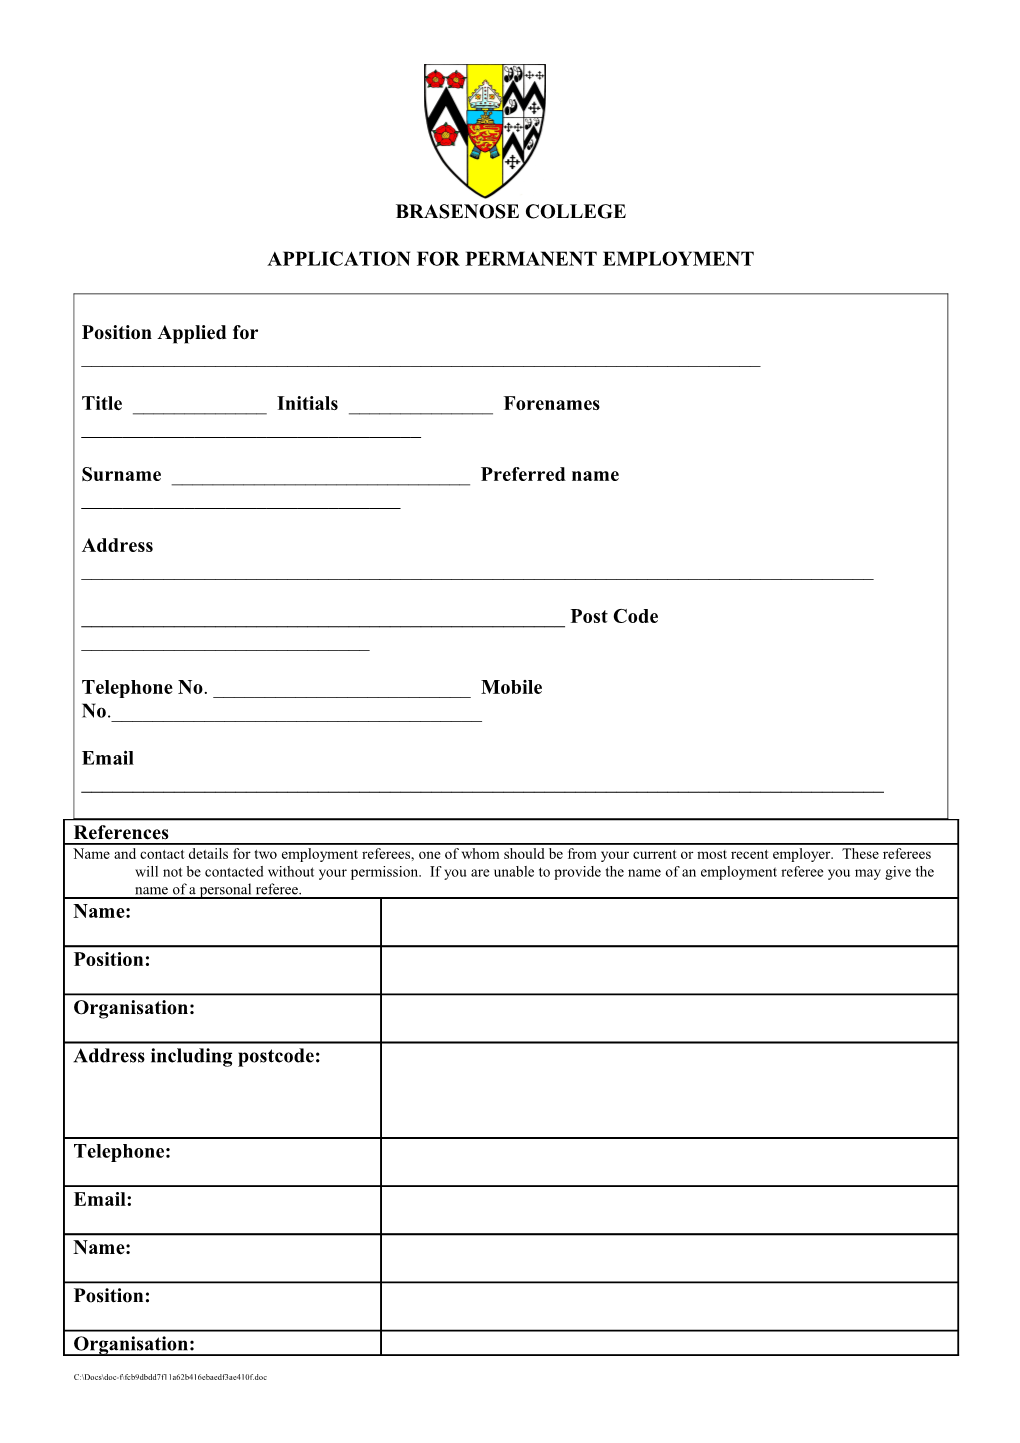 Application for Permanent Employment